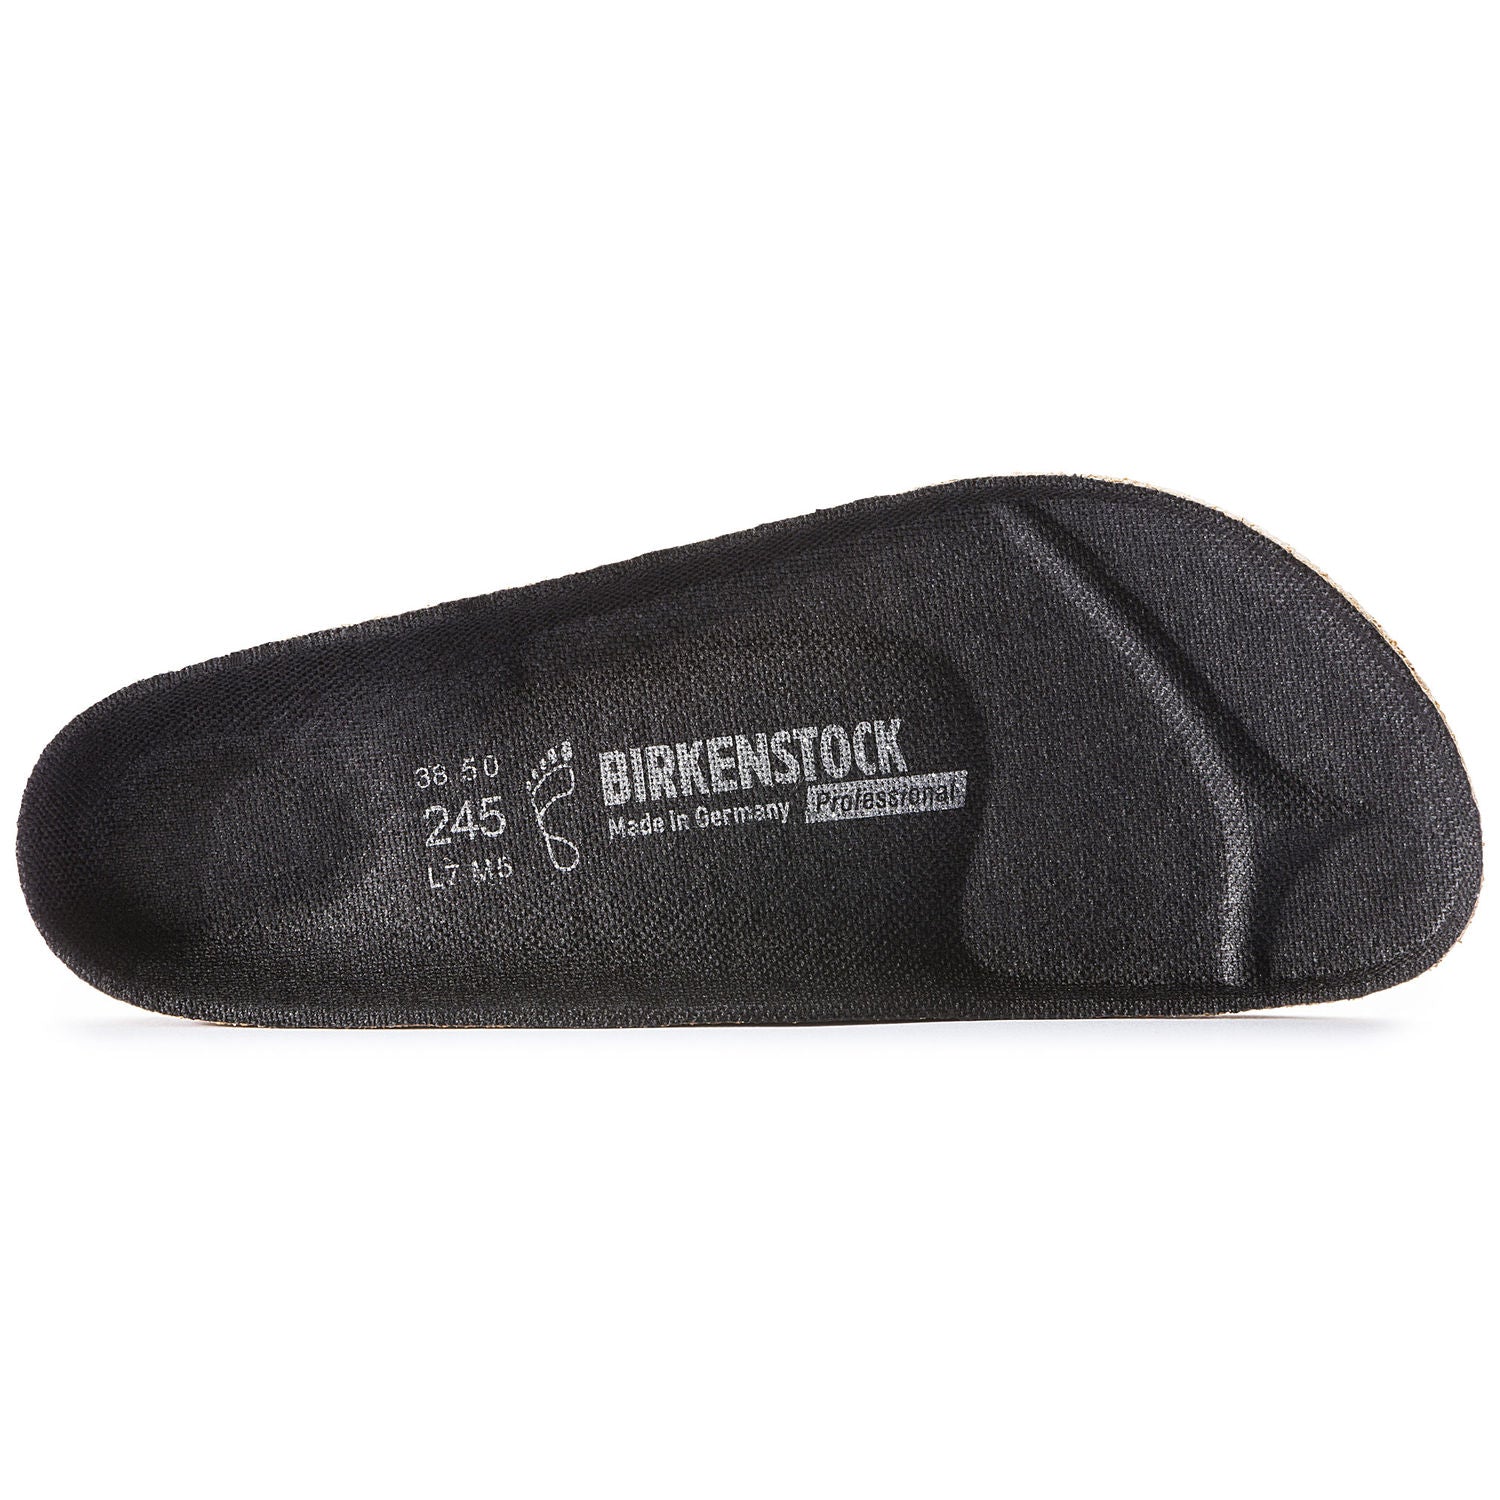 Replacement Insole : Cork